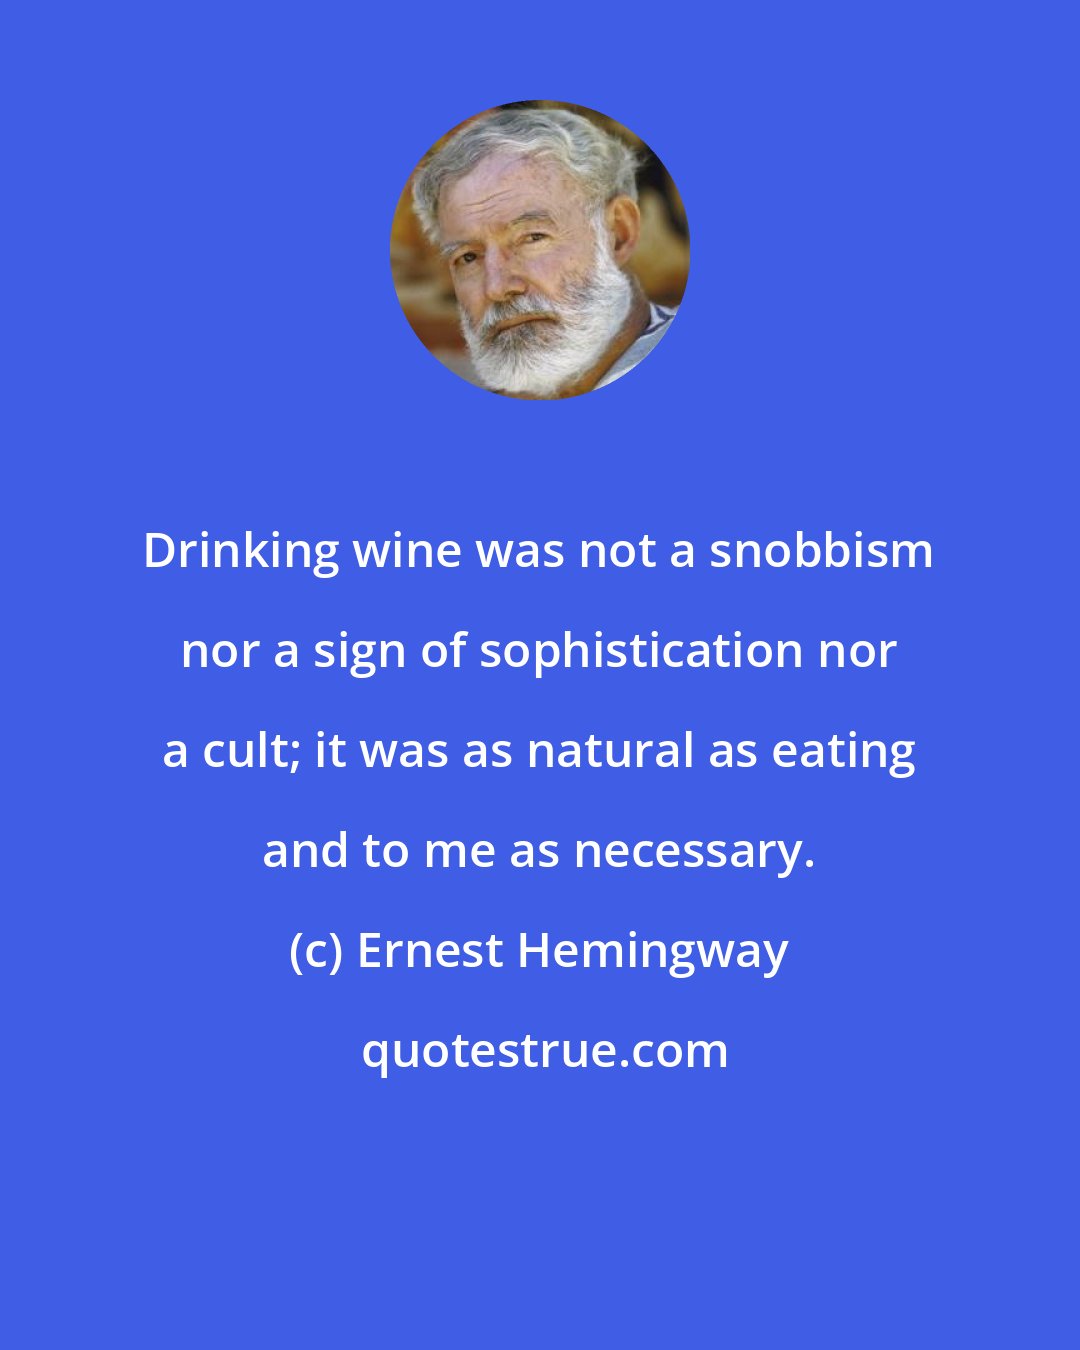 Ernest Hemingway: Drinking wine was not a snobbism nor a sign of sophistication nor a cult; it was as natural as eating and to me as necessary.